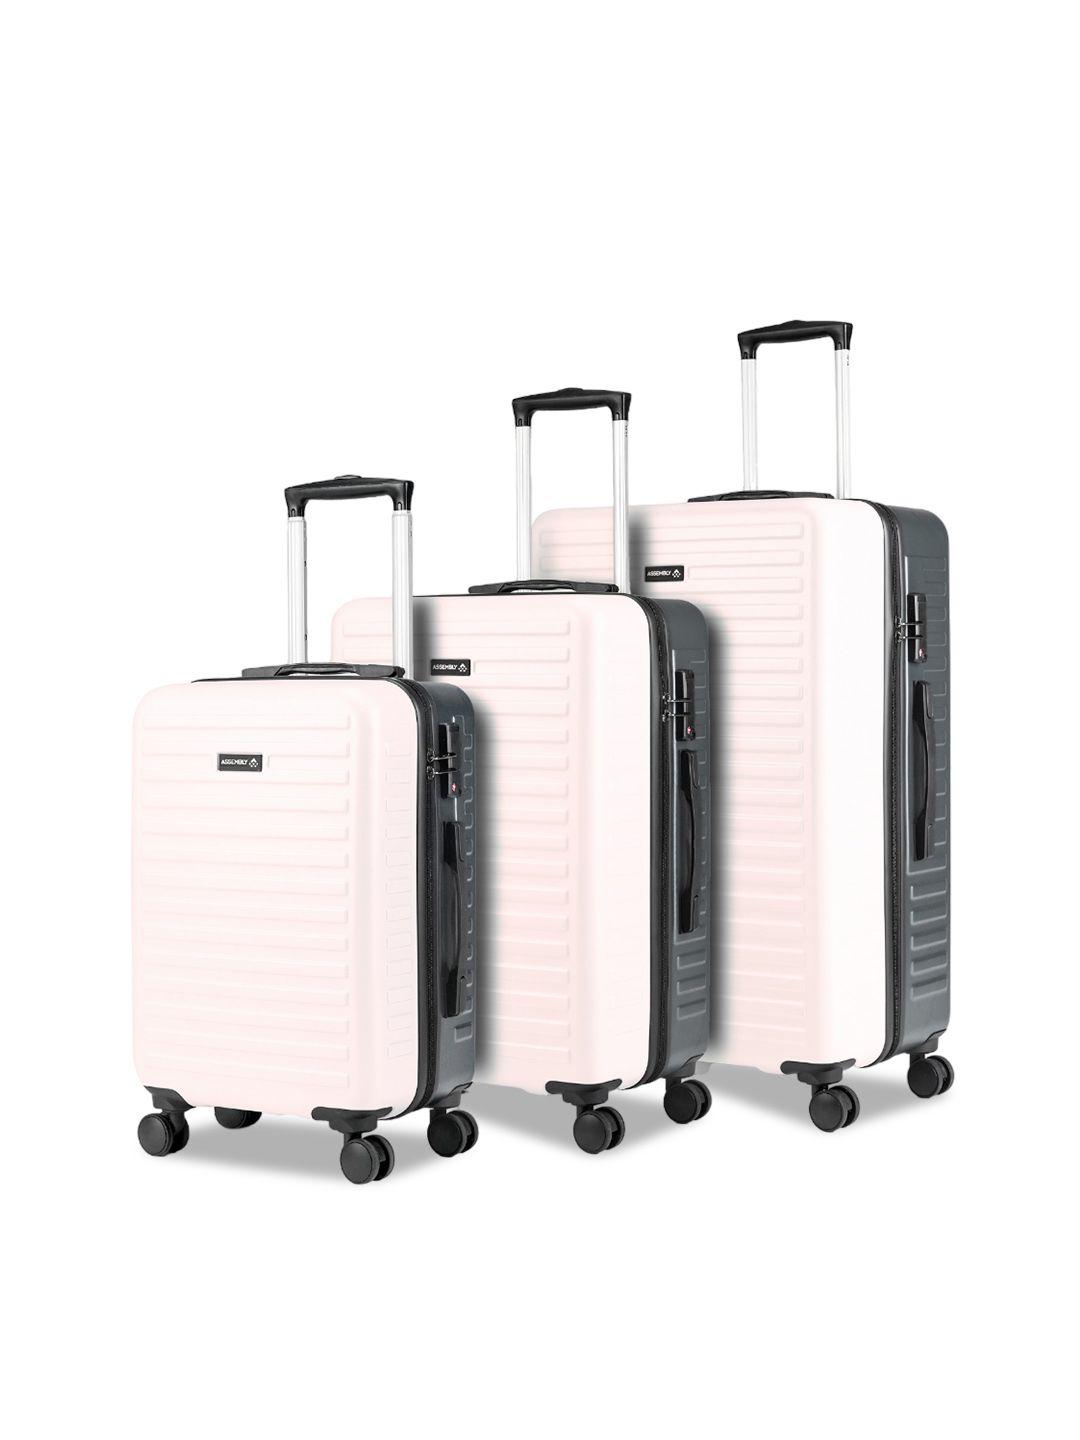 assembly set of 3 textured hard-sided trolley suitcases